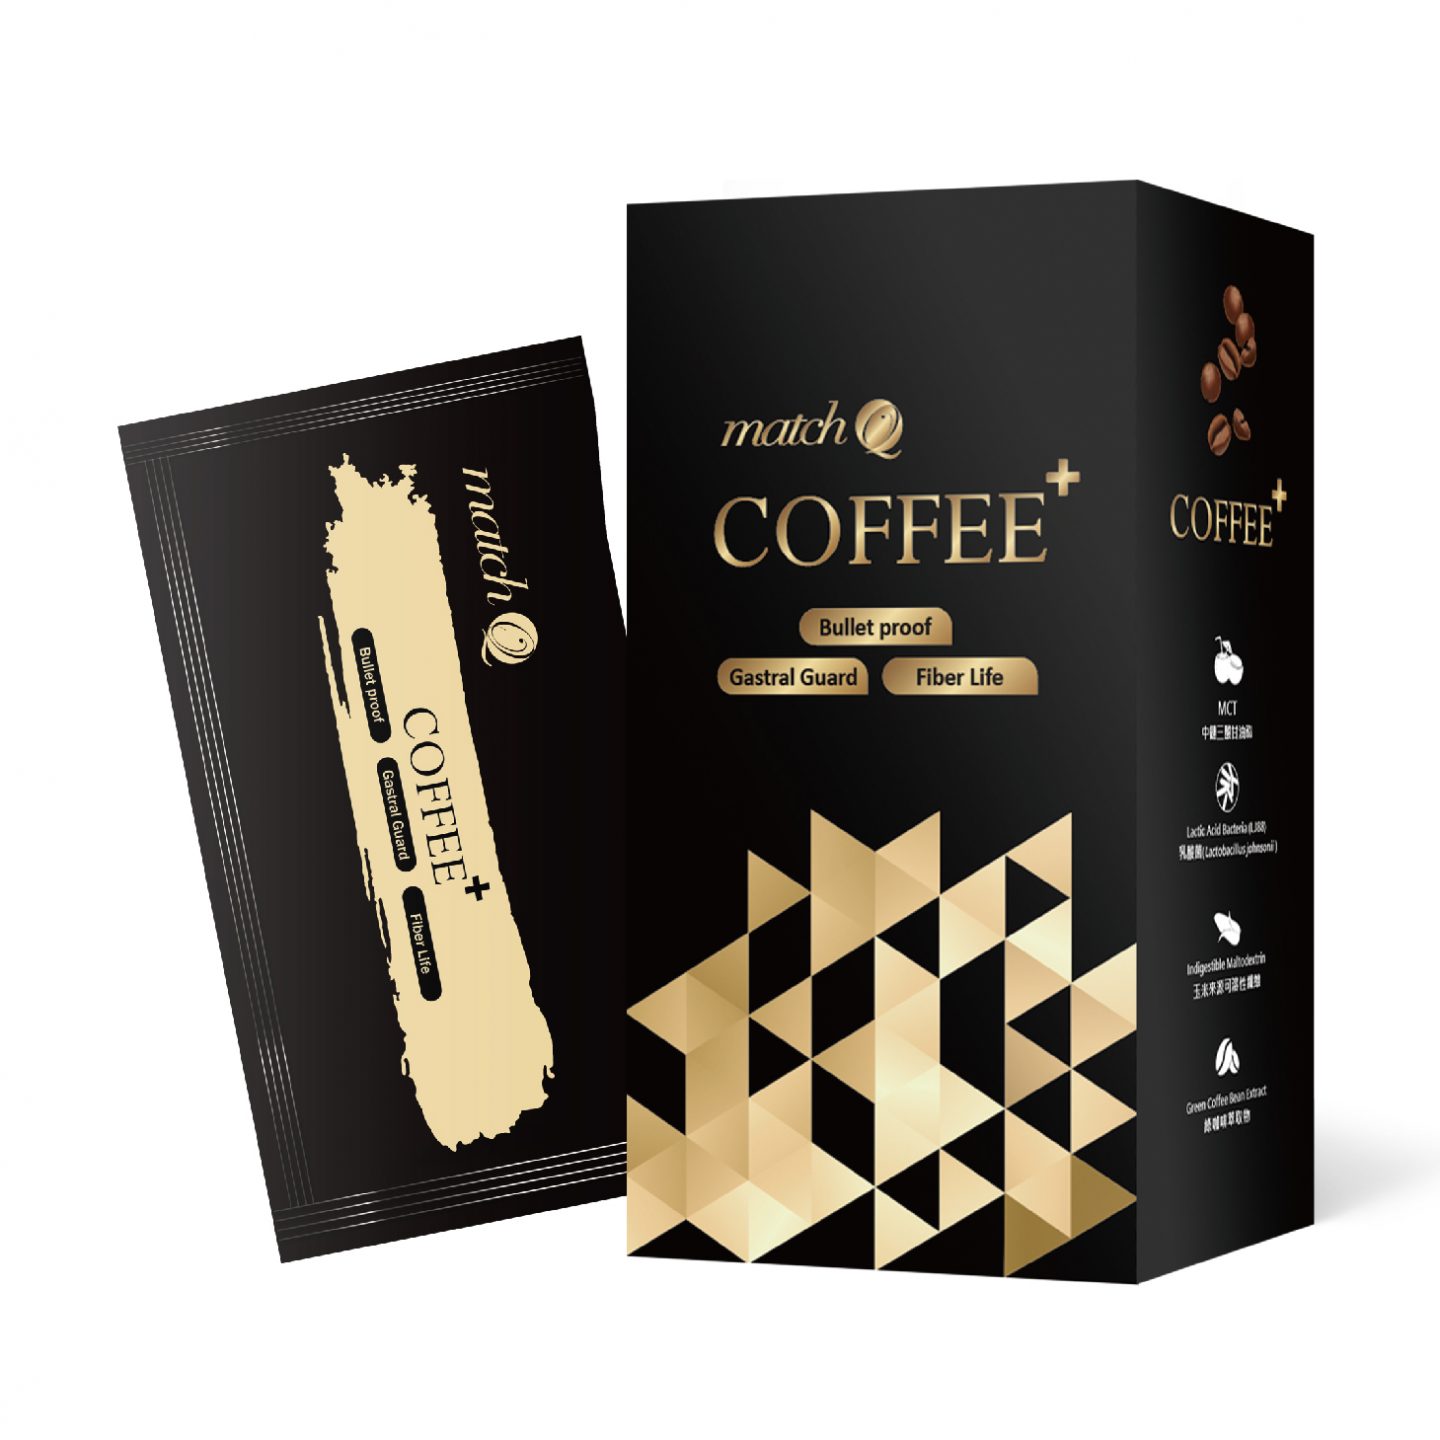 New products : Bulletproof COFFEE⁺